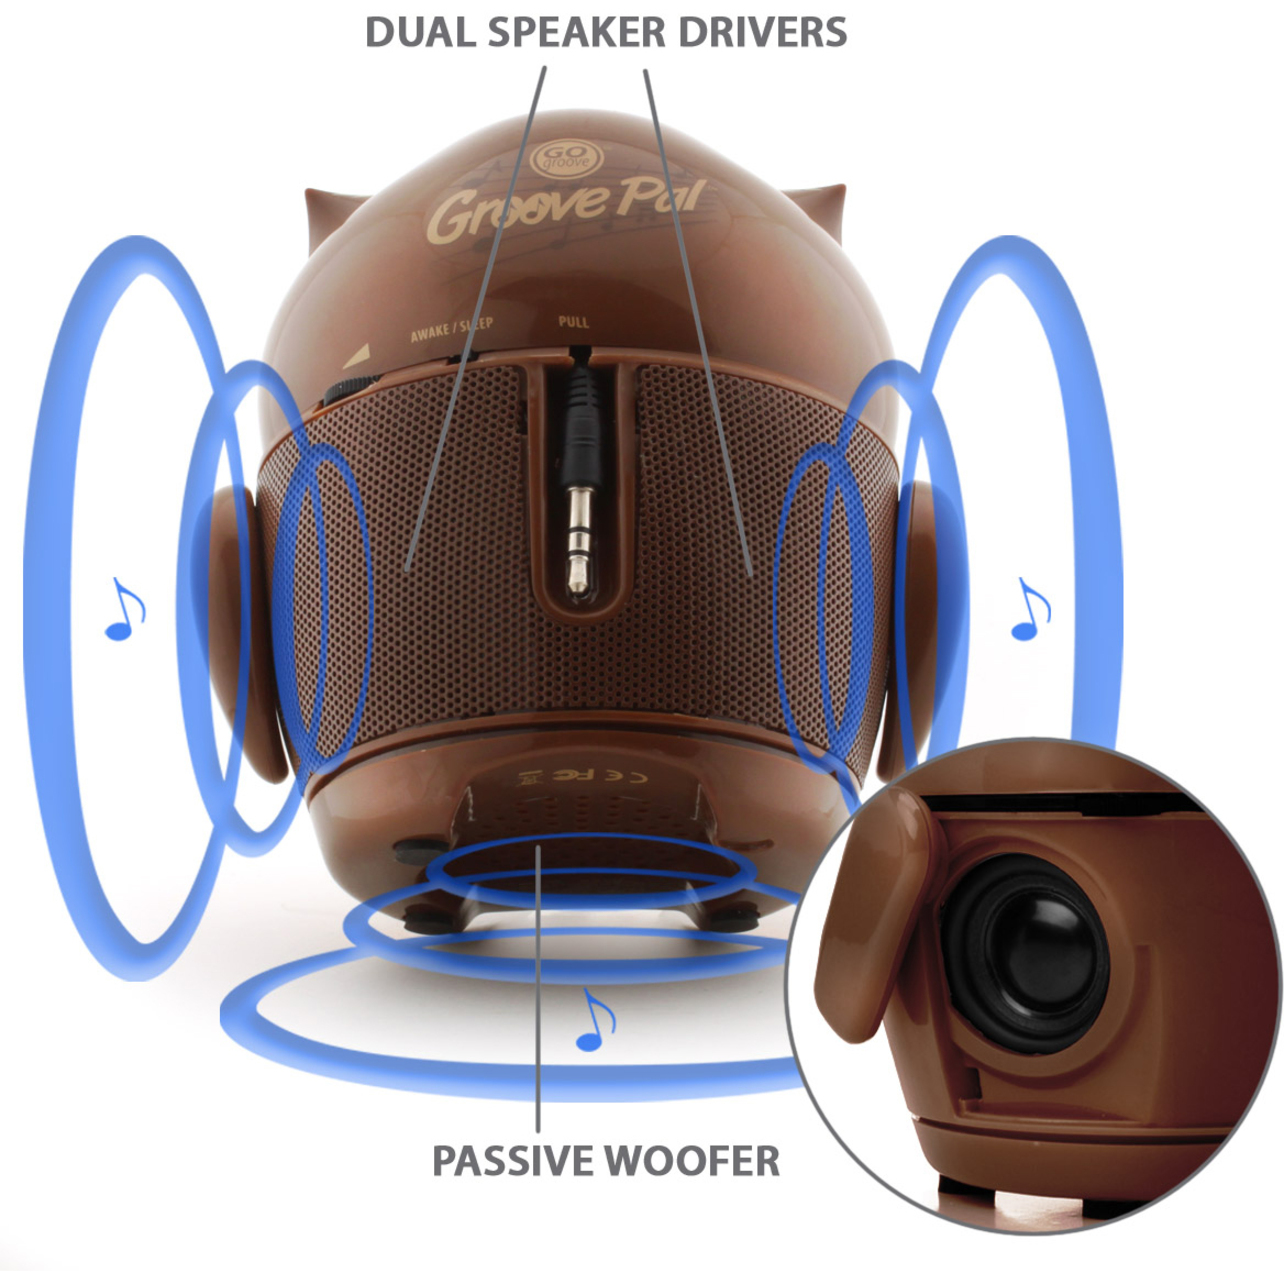 GOgroove Groove Pal GG-PAL-OWL 2.0 Portable Speaker System, 4 W RMS, Brown - image 2 of 7